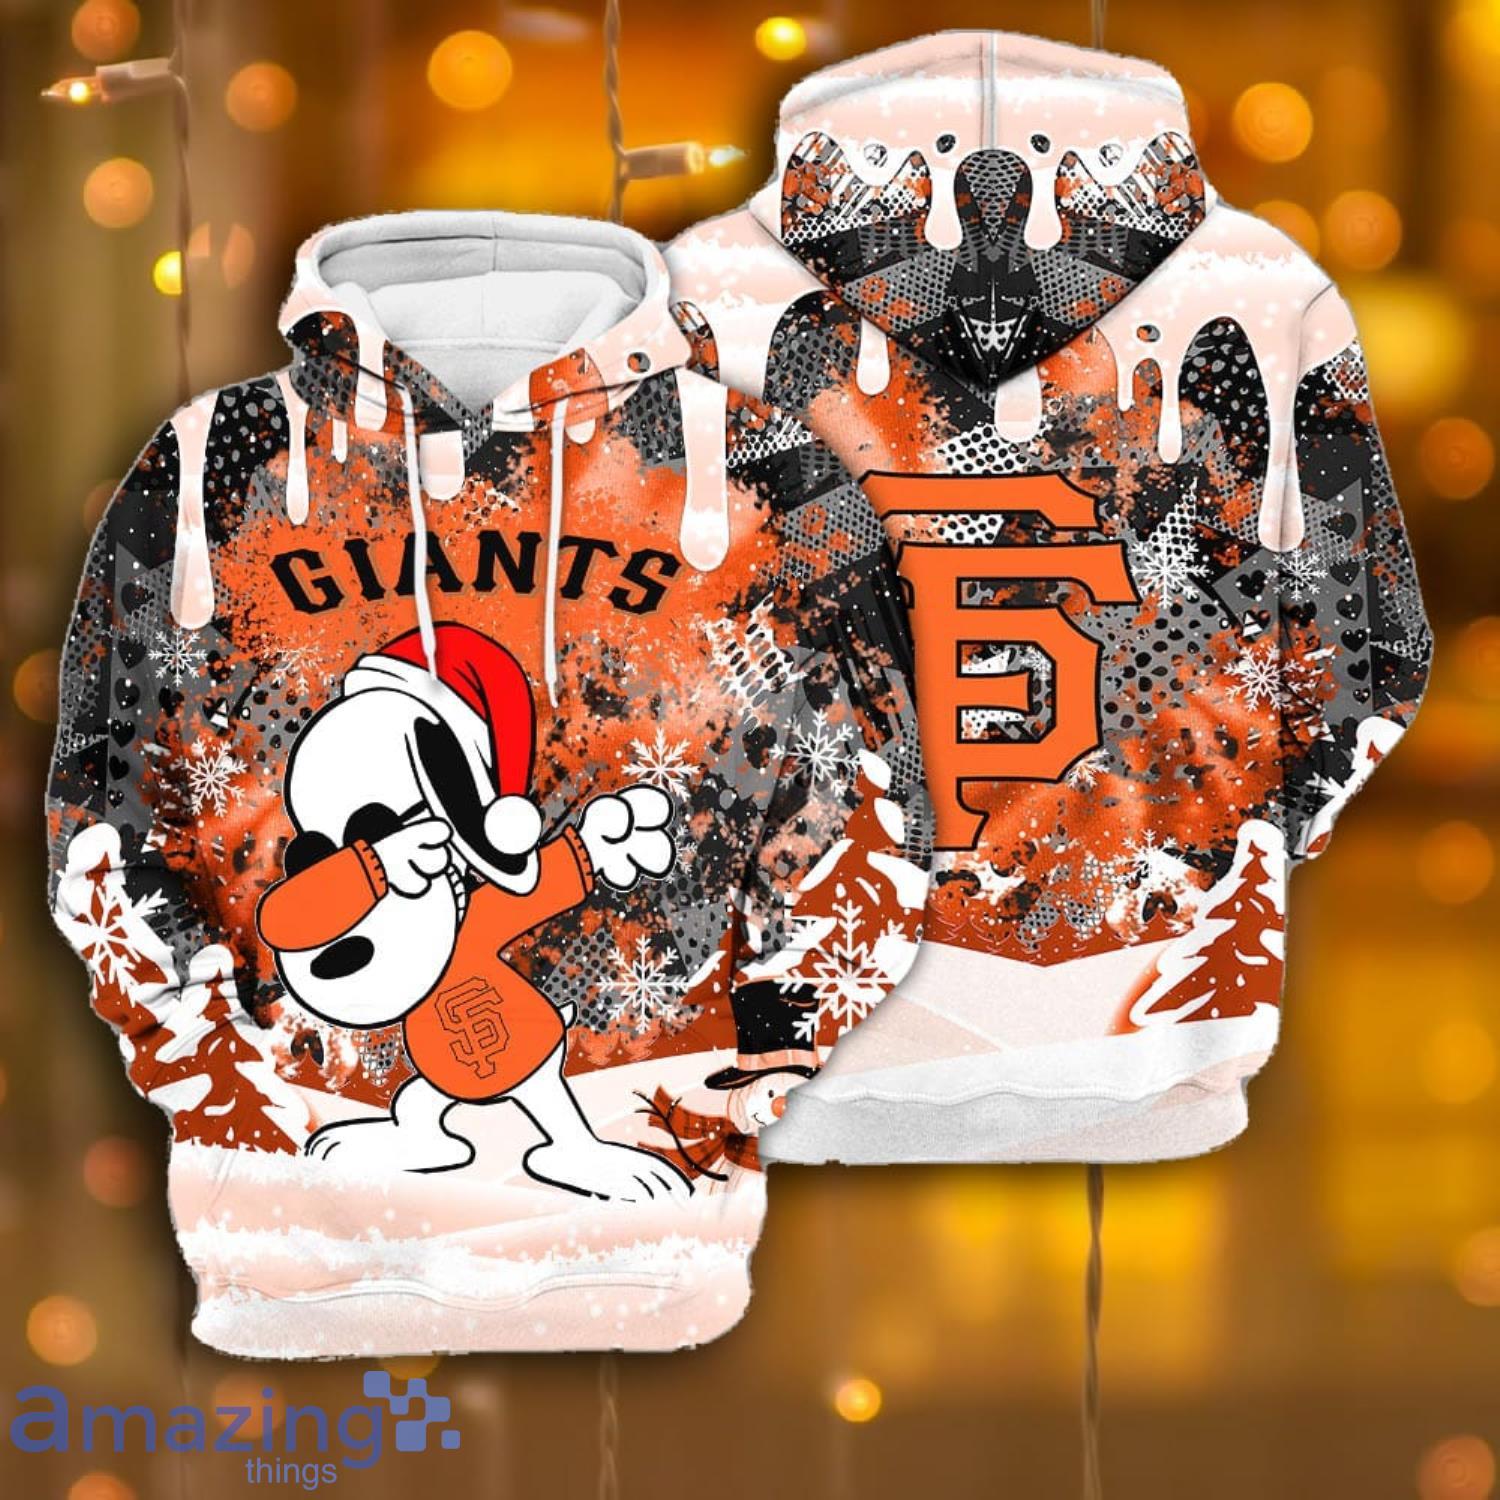 San Francisco Giants Hoodie Unisex Adult Size S to 3XL